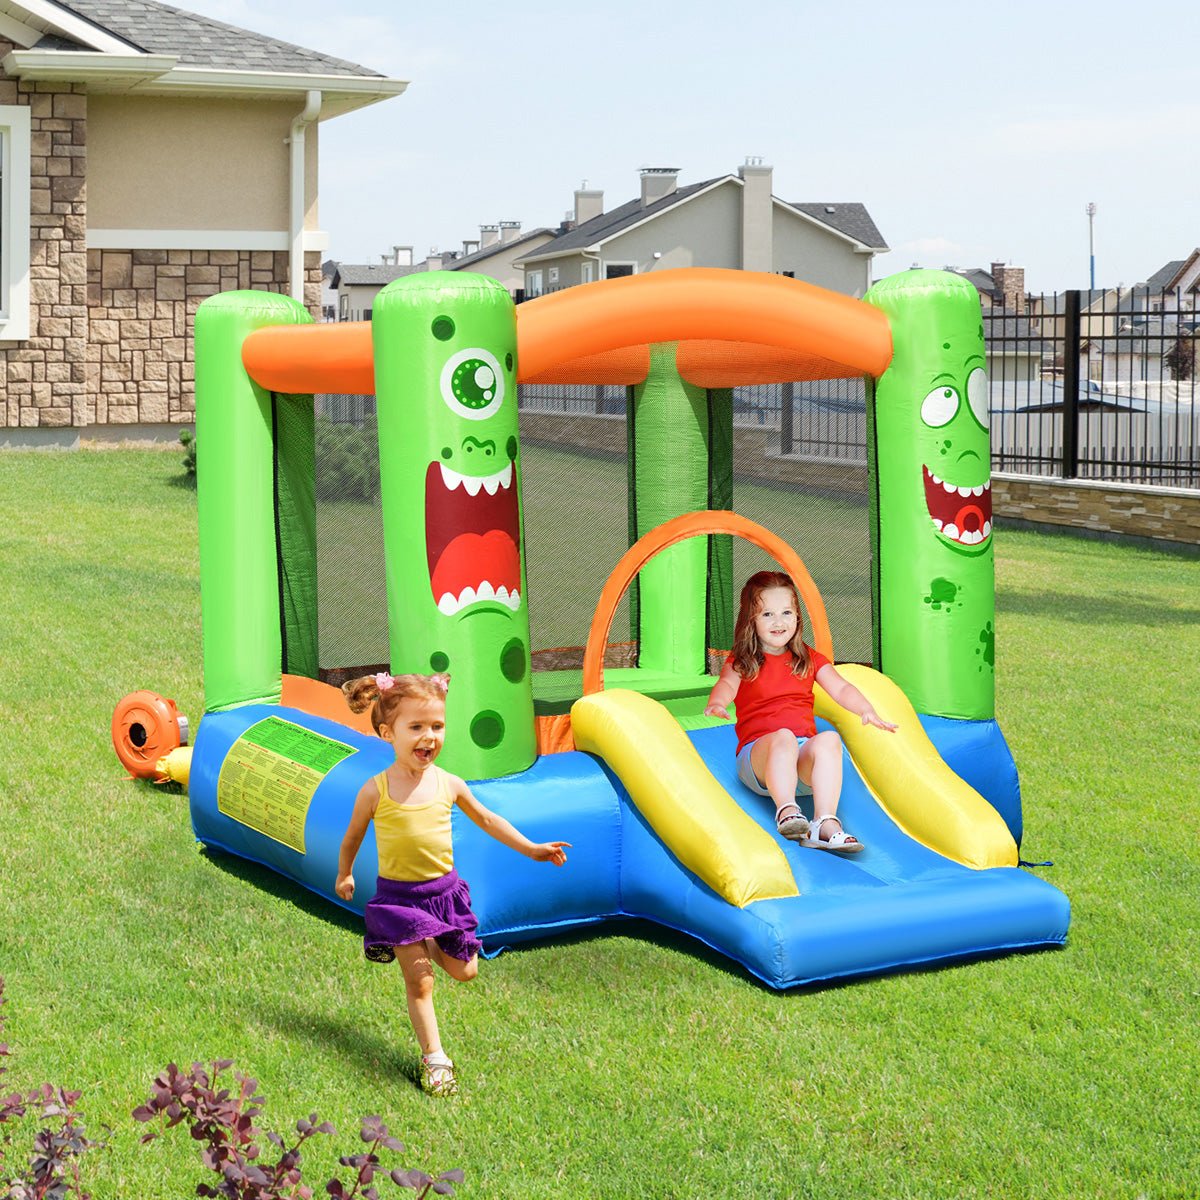 Active Adventures: Inflatable Bounce Playhouse with Basketball Rim & Slide